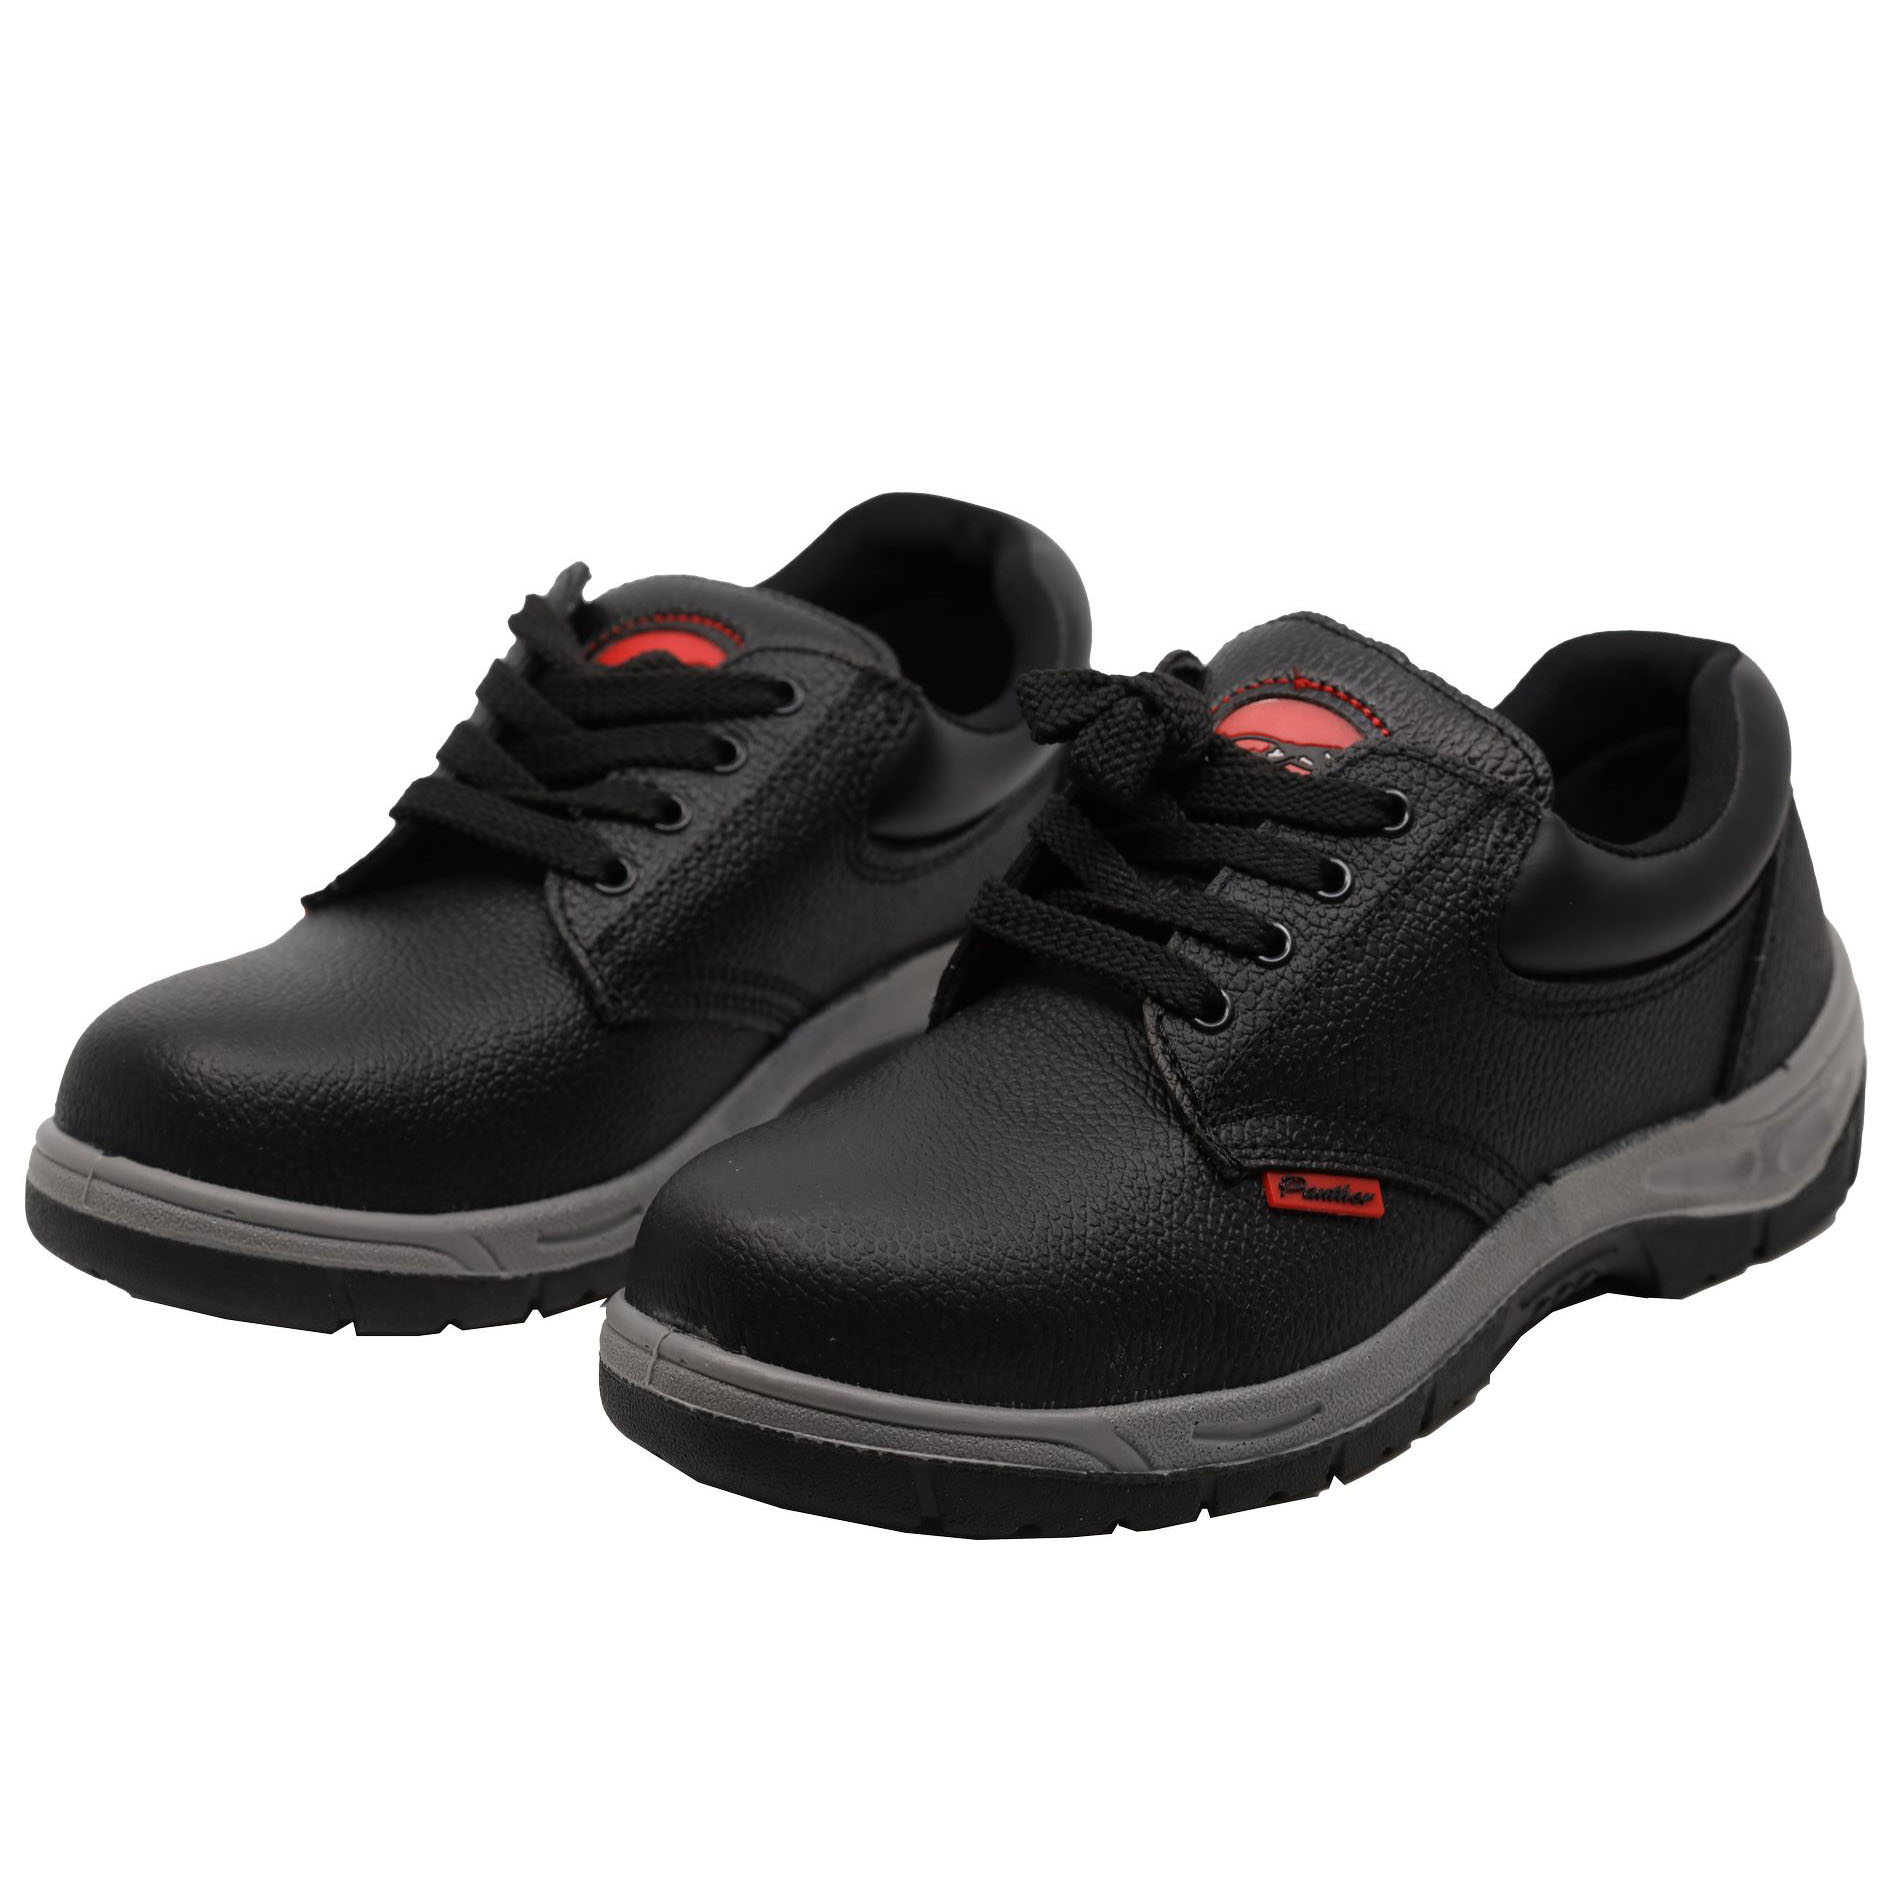 Buy SAFETY SHOES 43" S Online | Safety | Qetaat.com